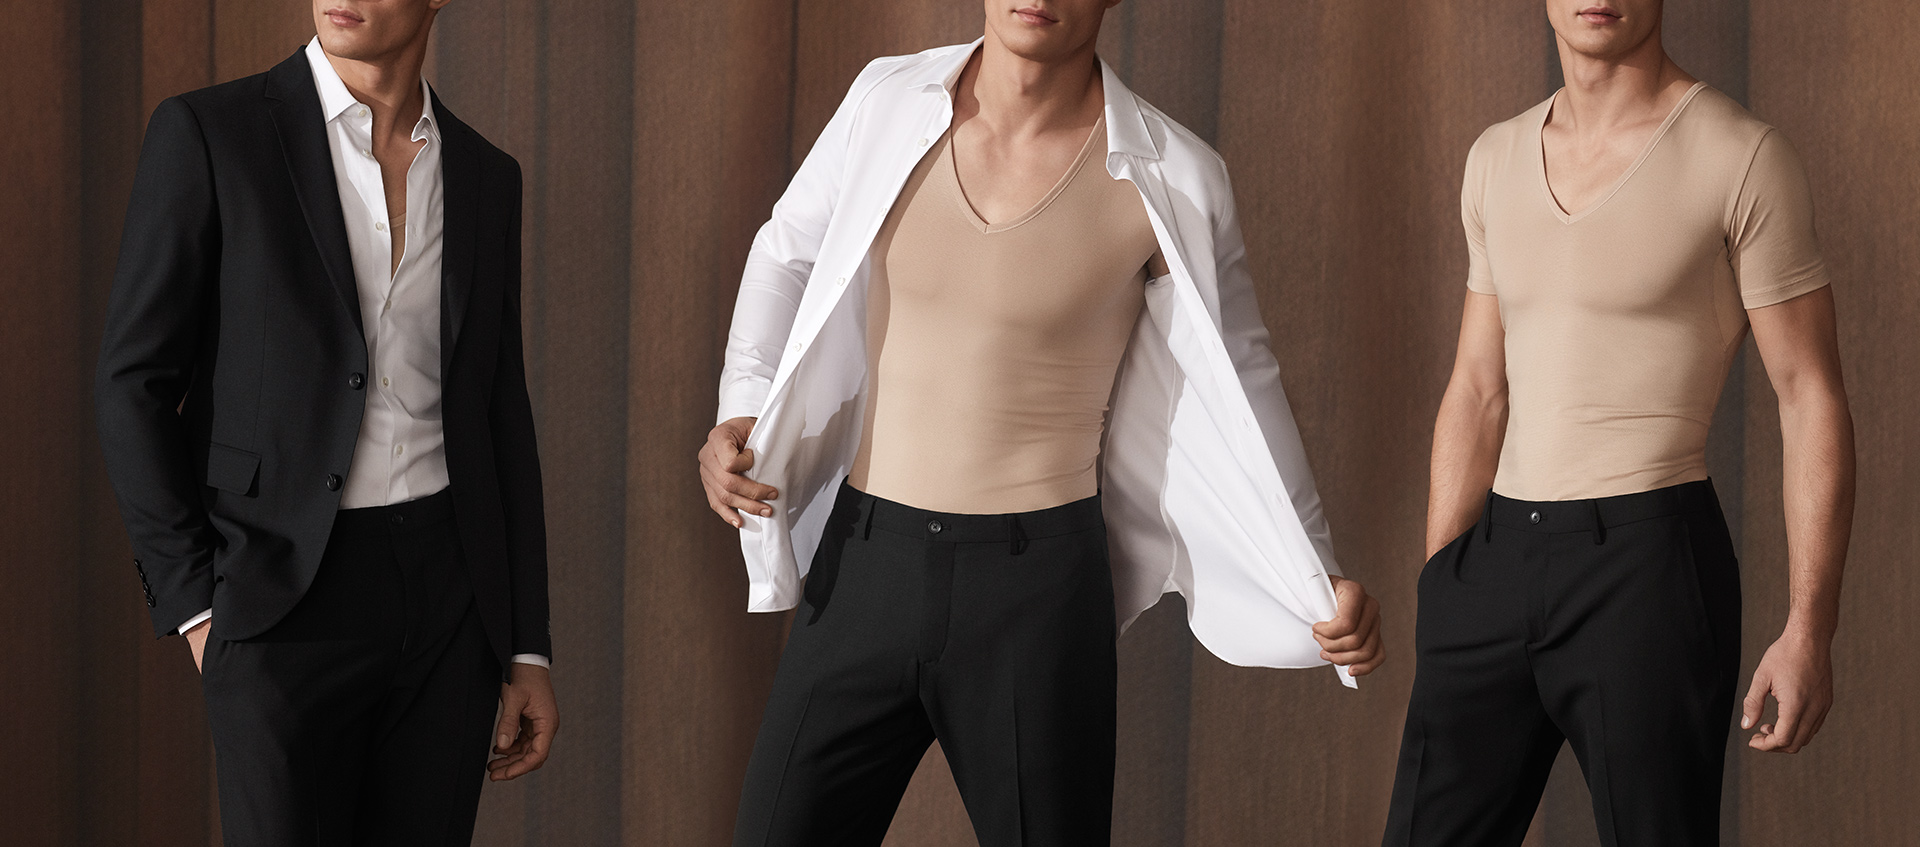 The undershirt by mey is specially designed for the discerning requirements of businessmen | mey®